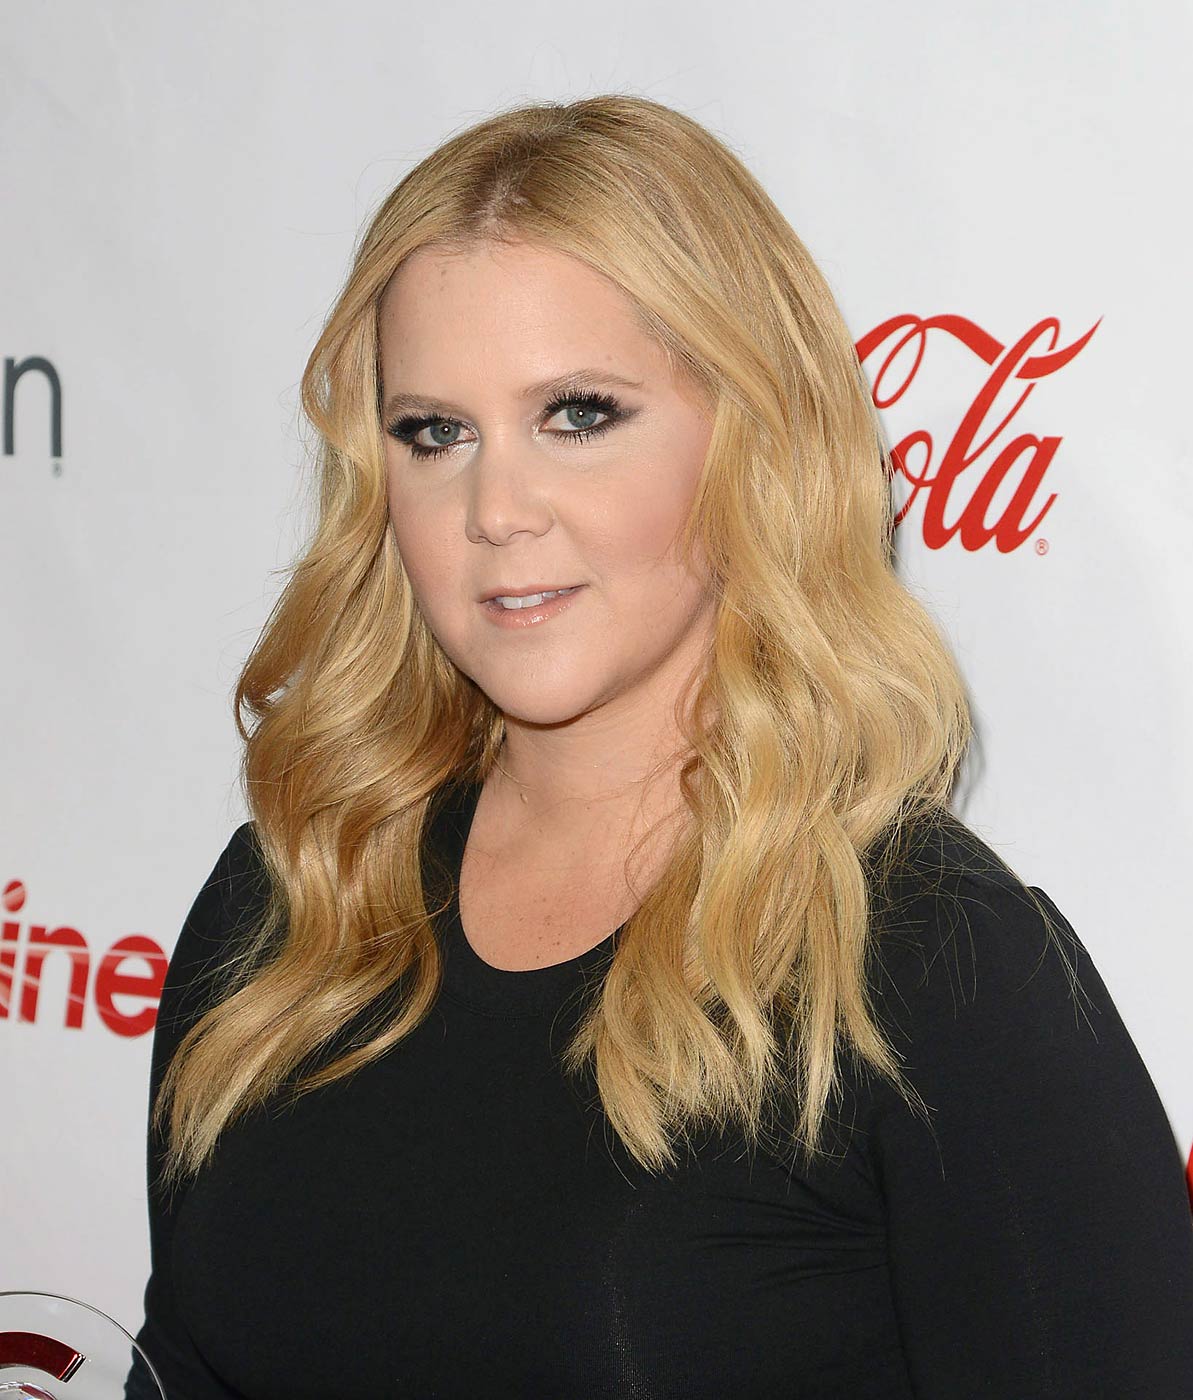 Amy Schumer attends the CinemaCon Big Screen Achievement Awards on April 23, 2015 in Las Vegas, NV. (C Flanigan—FilmMagic/Getty Images)